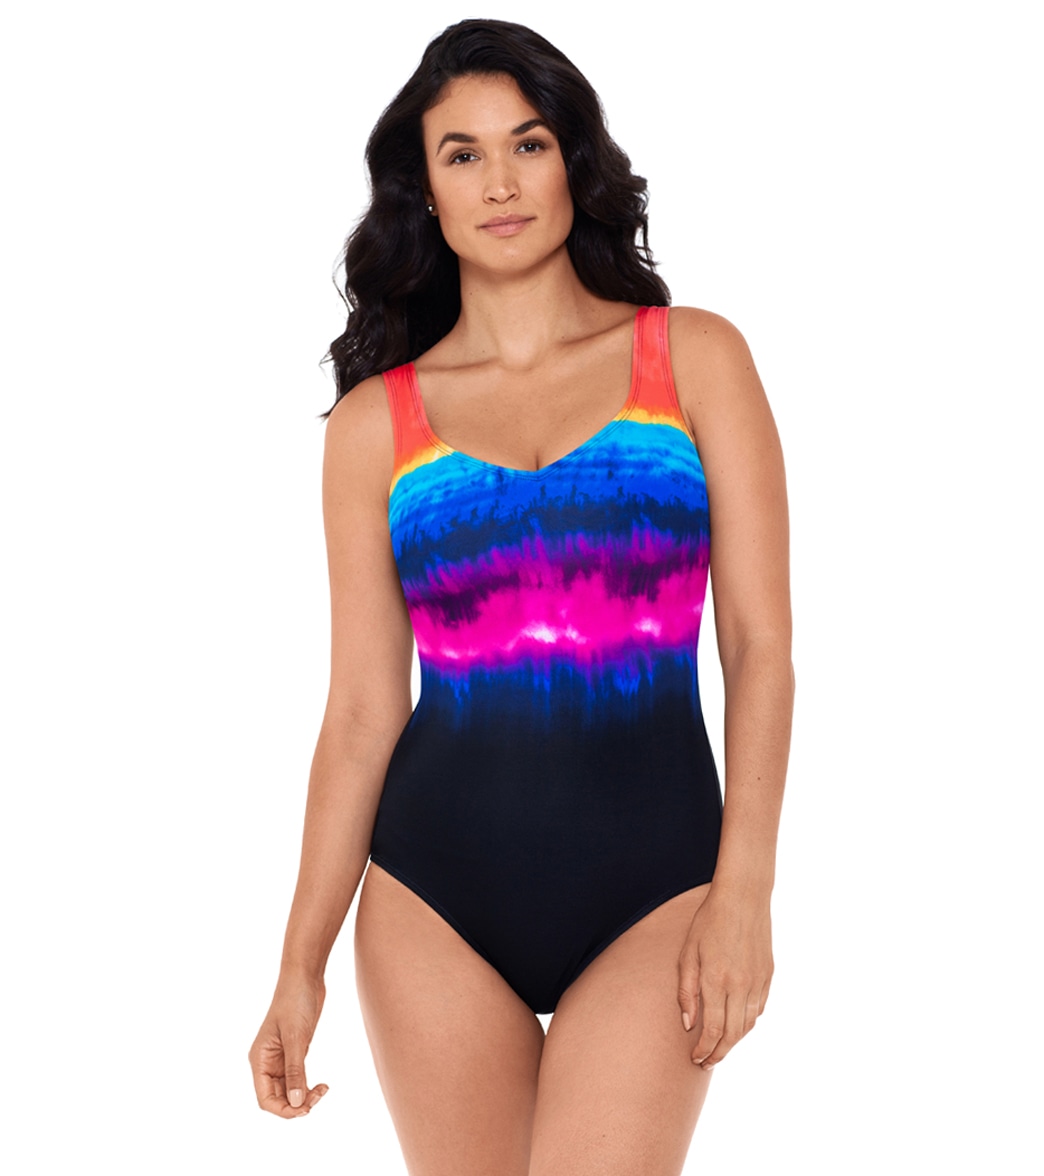 Reebok Women's Party In My Cabana V-Neck Chlorine Resistant One Piece Swimsuit - Multi 10 - Swimoutlet.com